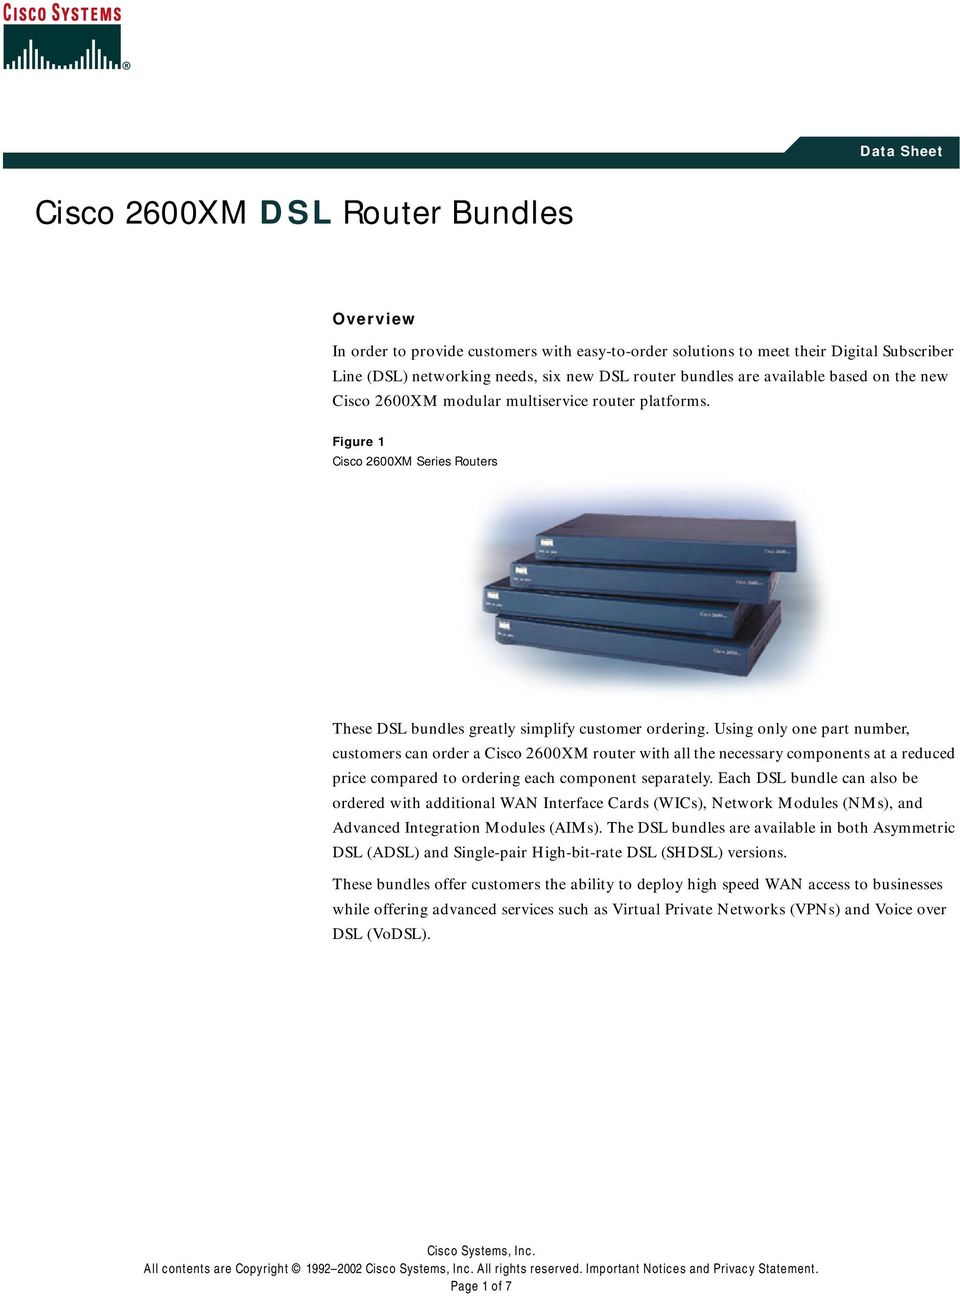 Using only one part number, customers can order a Cisco 2600XM router with all the necessary components at a reduced price compared to ordering each component separately.